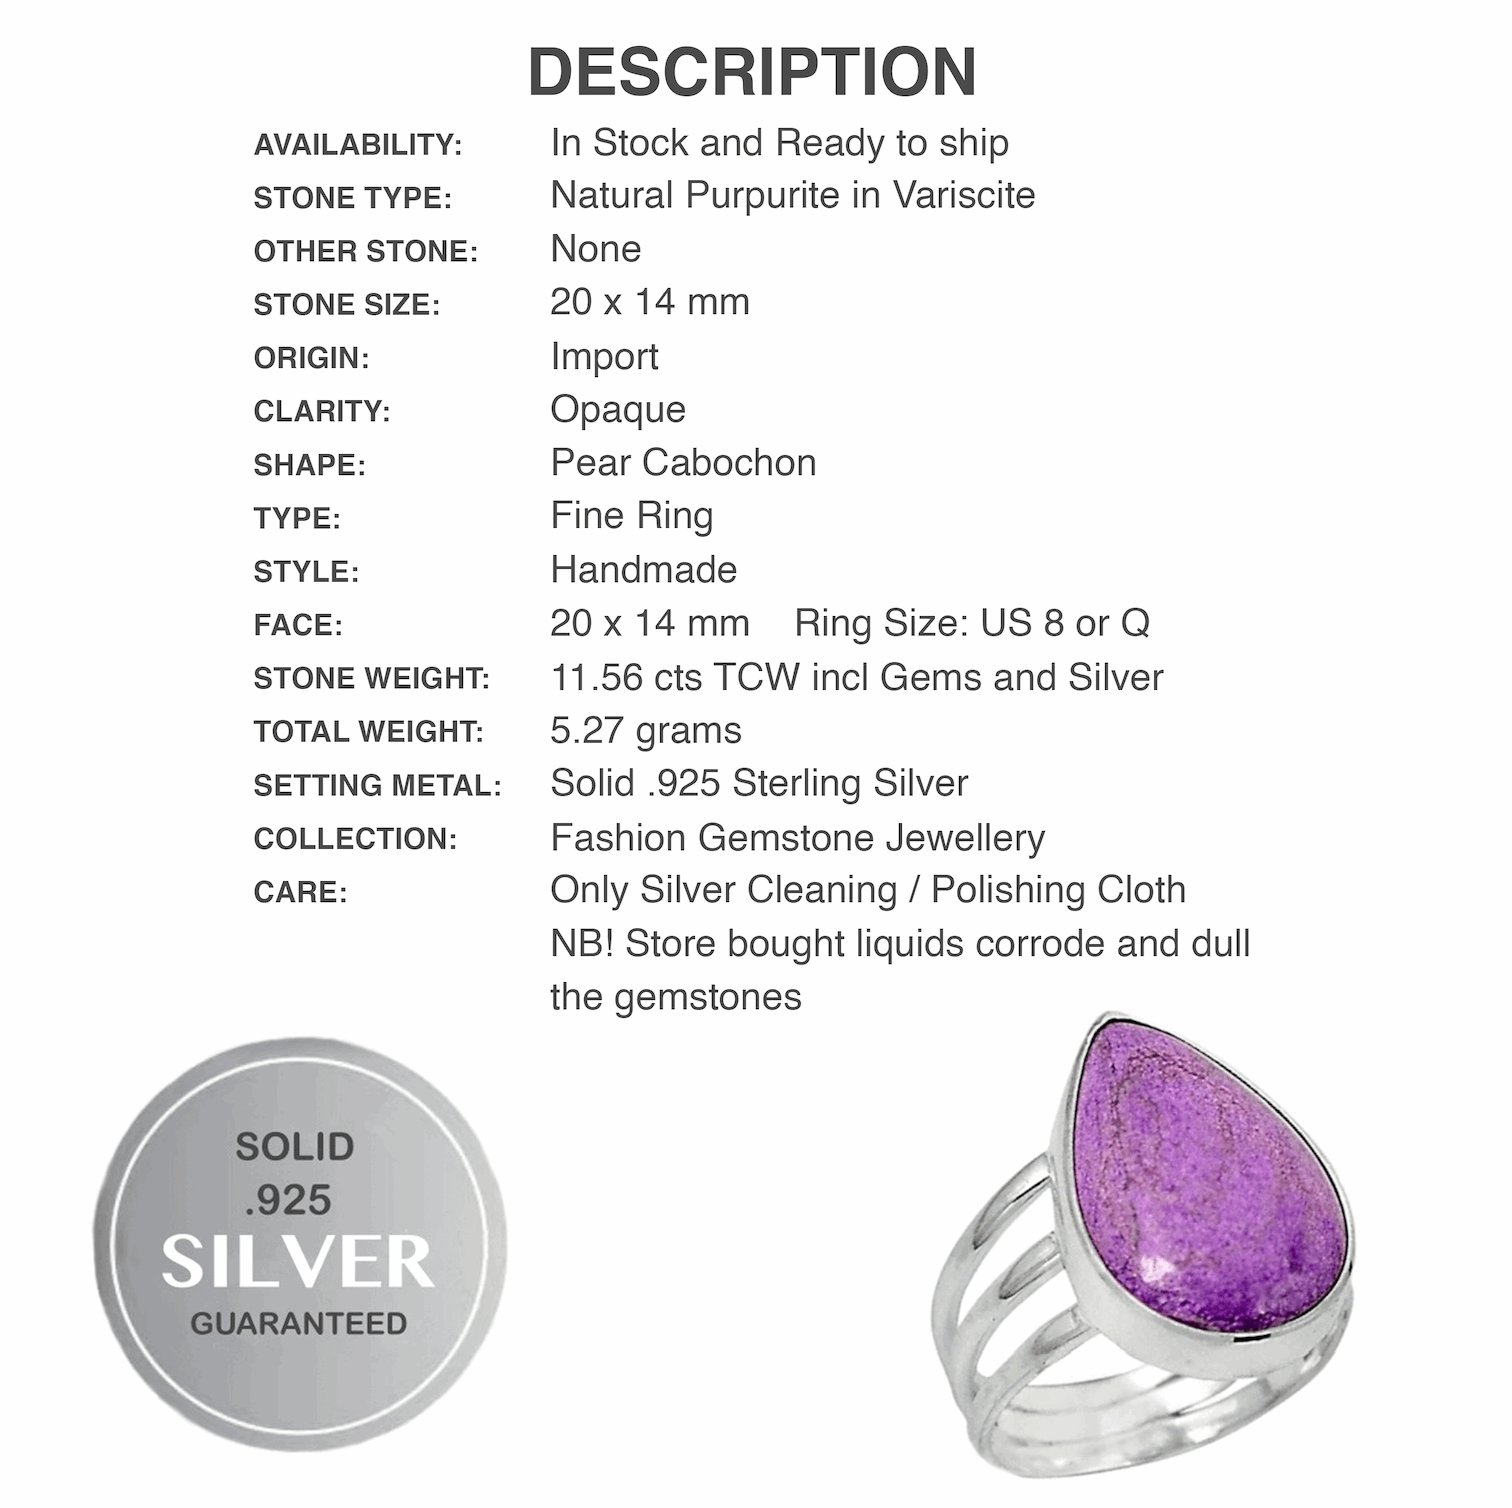 11.59 cts Natural Purpurite in Variscite Gemstone Solid .925 Sterling Silver Ring Size 8